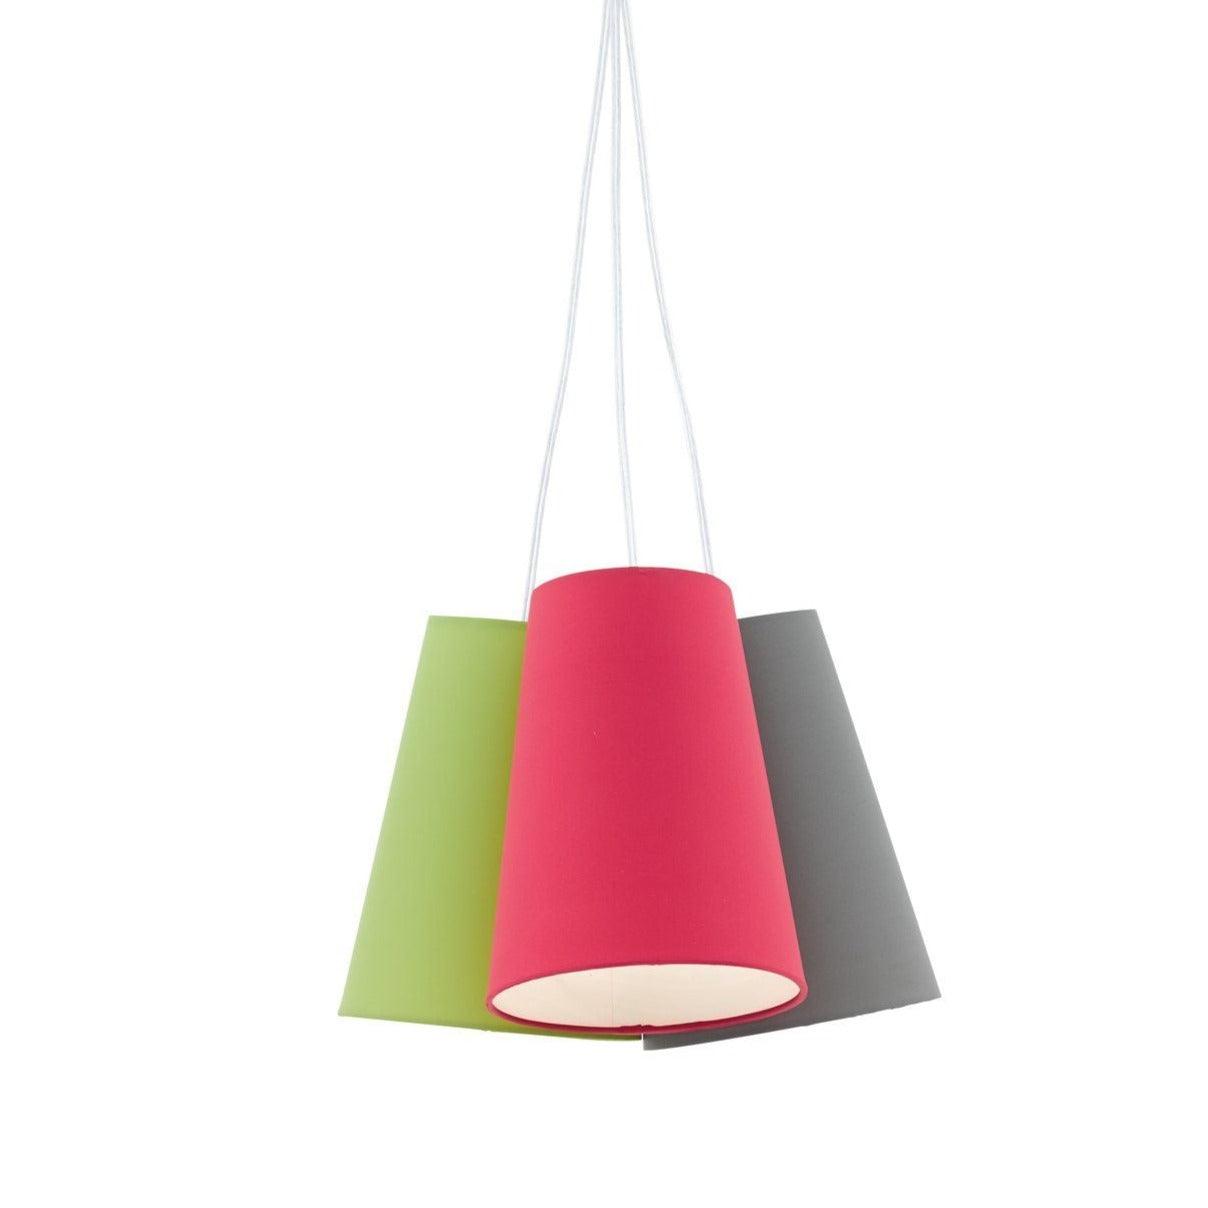 NEVORRES Pendant Light by The Light Library